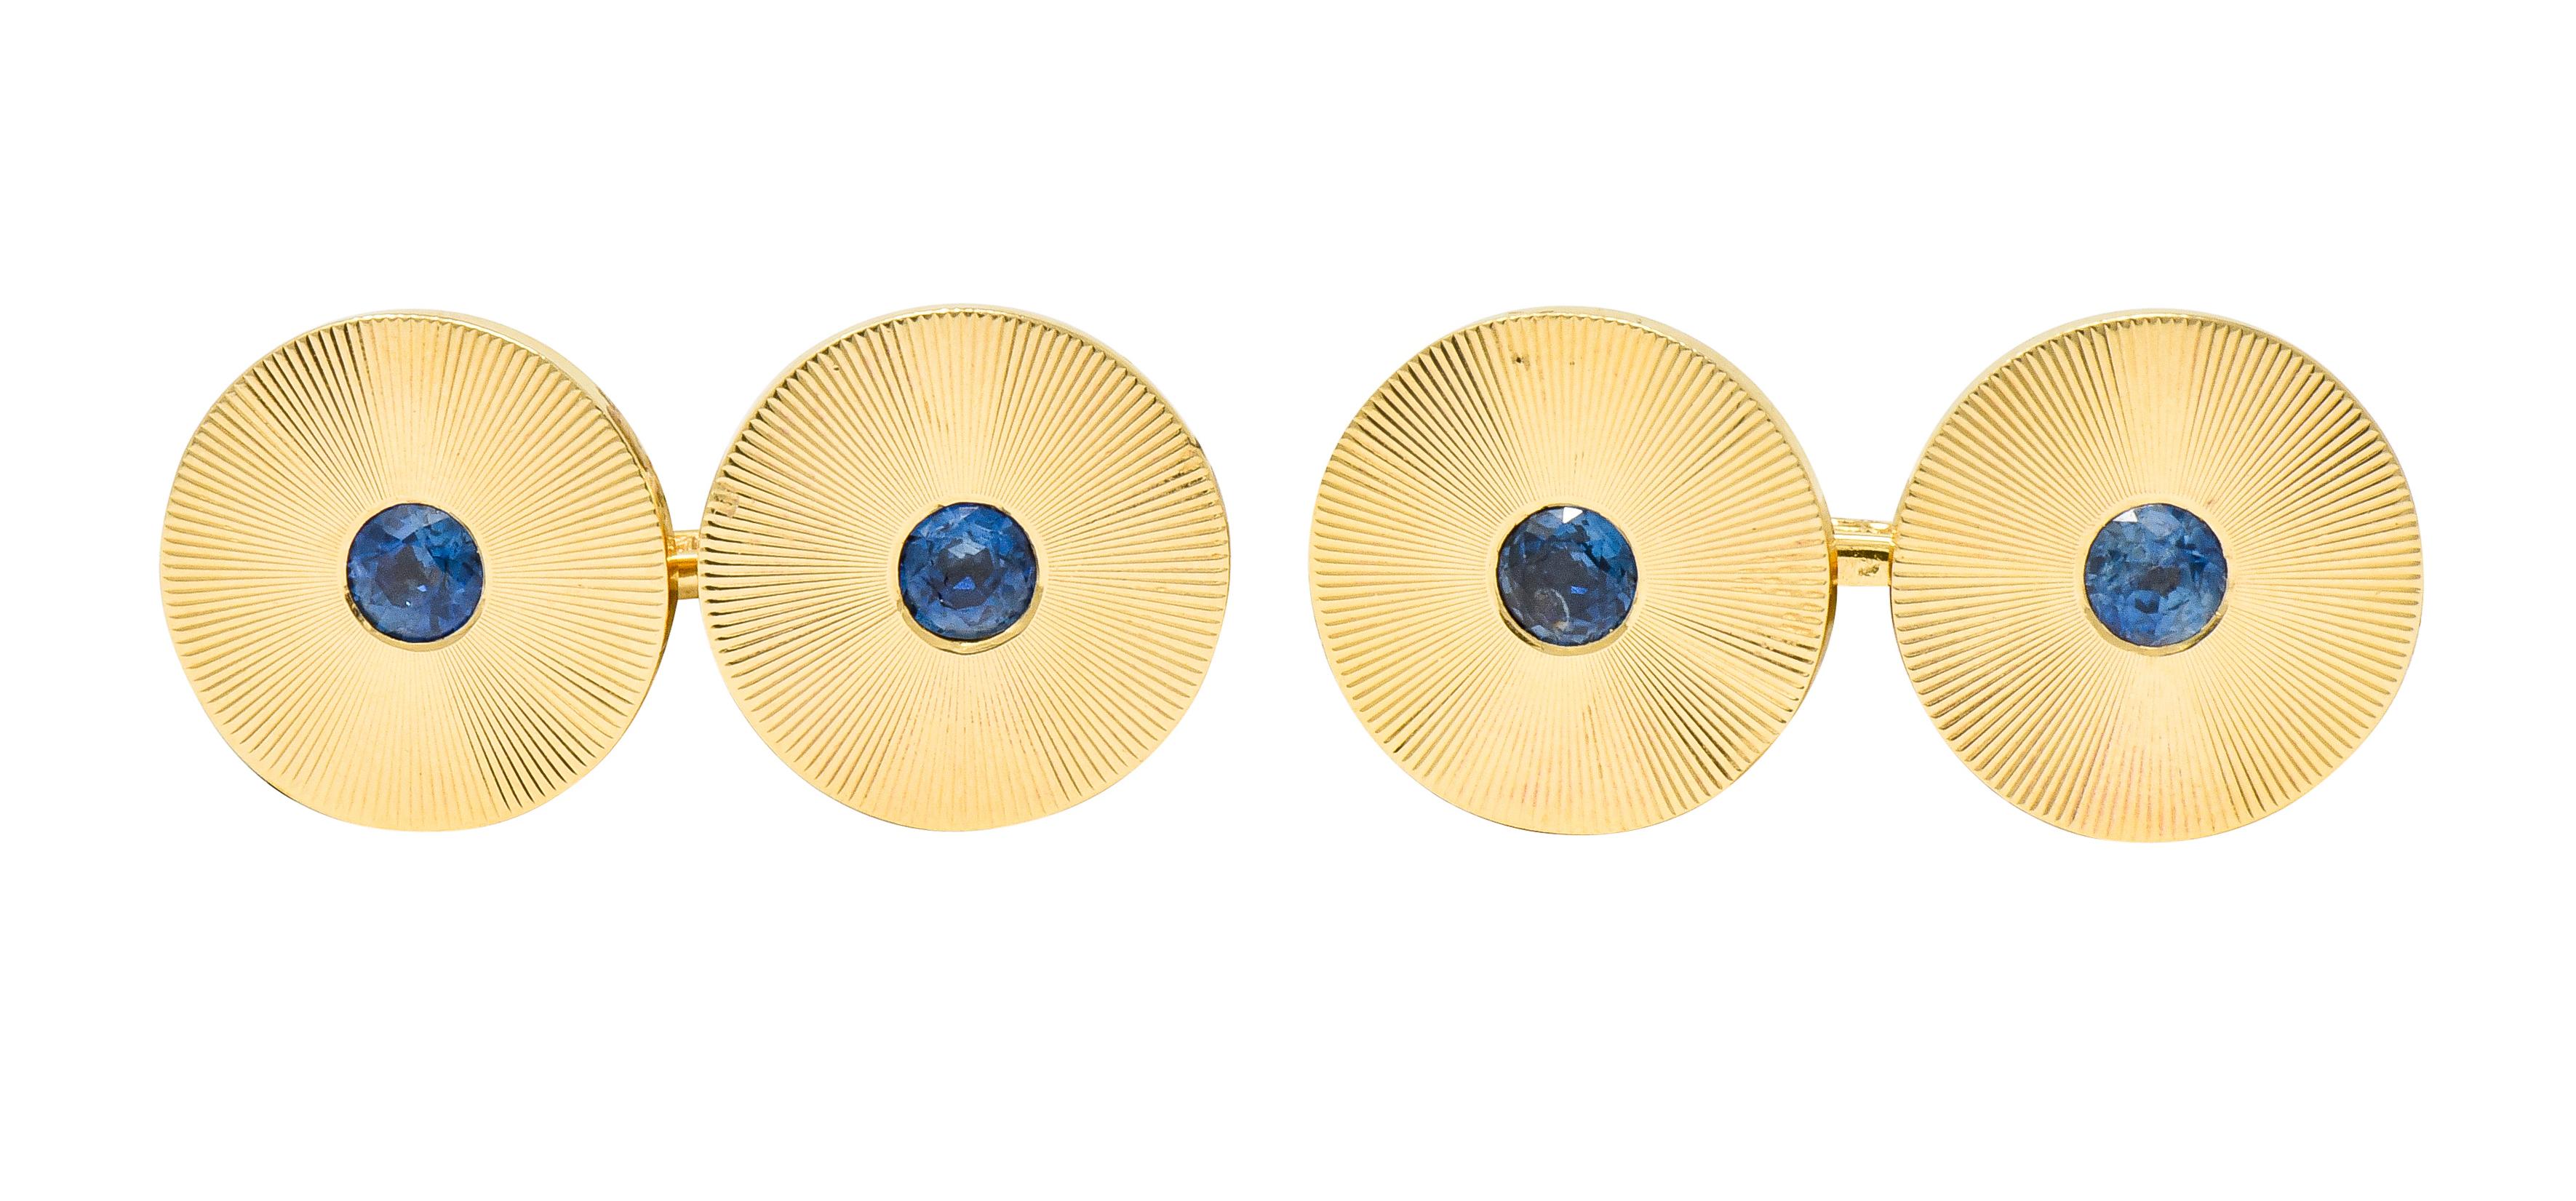 Link style cufflinks terminating as 13.9 mm round disk featuring a deeply engraved radiating motif

With four large matching spring loaded shirt studs featuring the same radiating disk motif, also measures 13.9 mm

And three small spring loaded